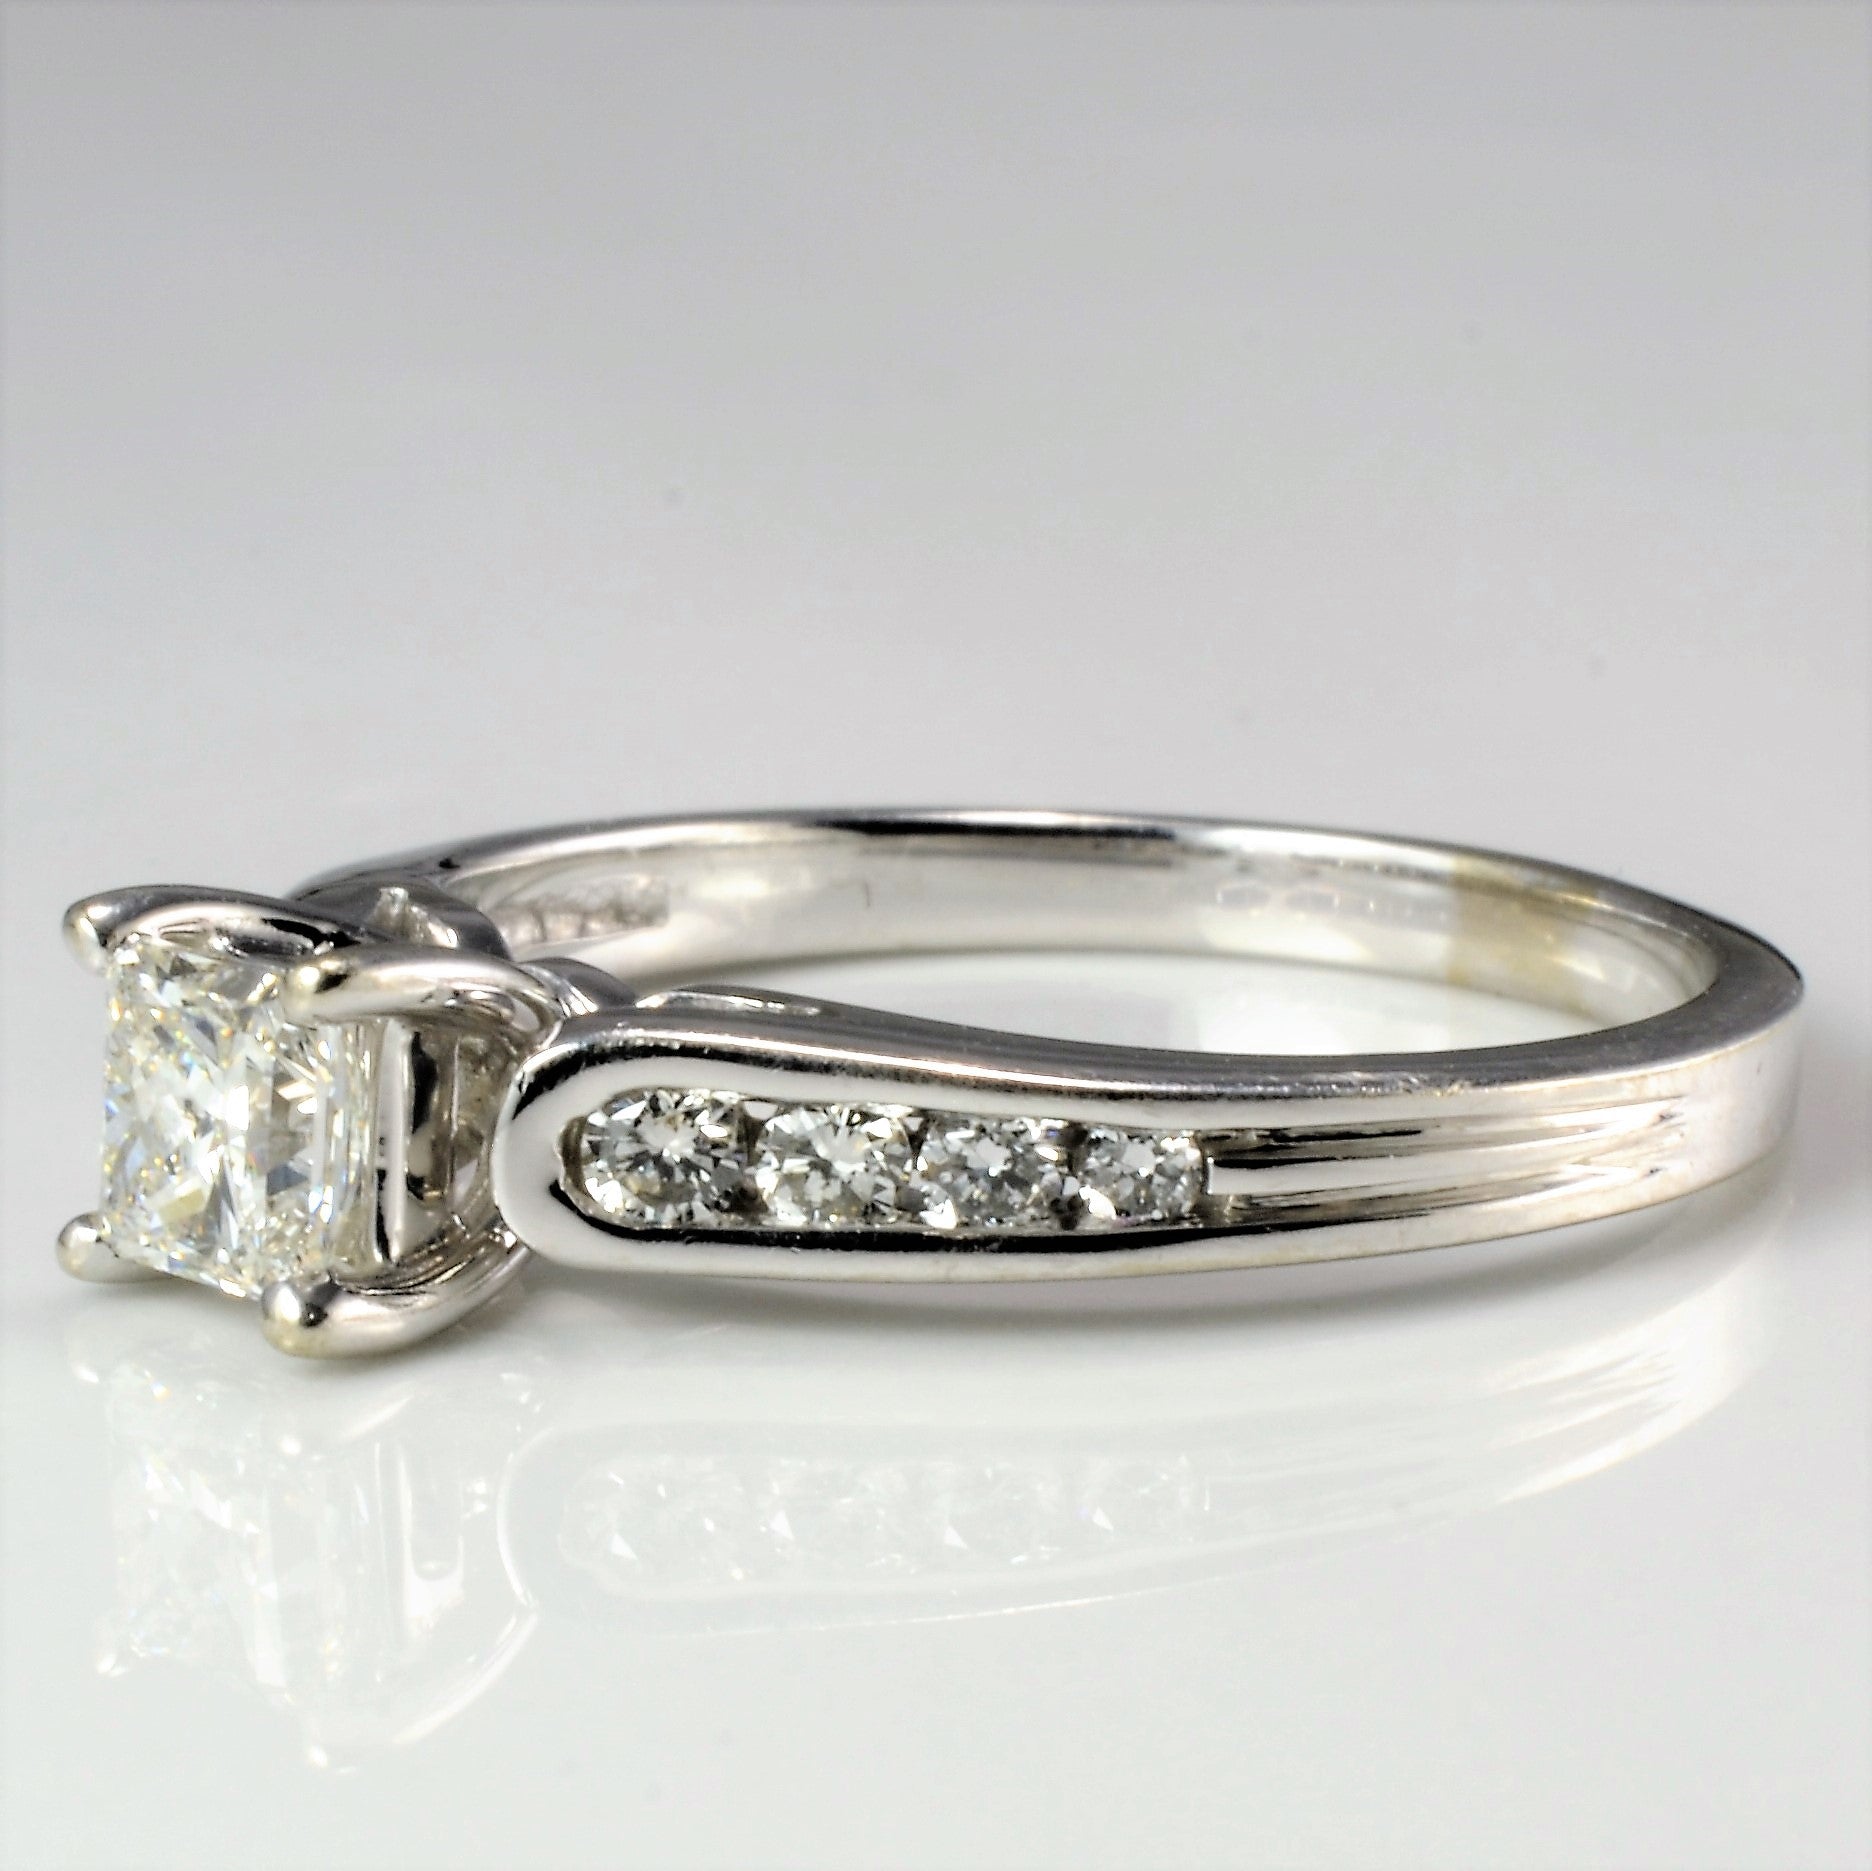 High Set Diamond with Accents Engagement Ring | 0.62 ctw, SZ 6.5 |